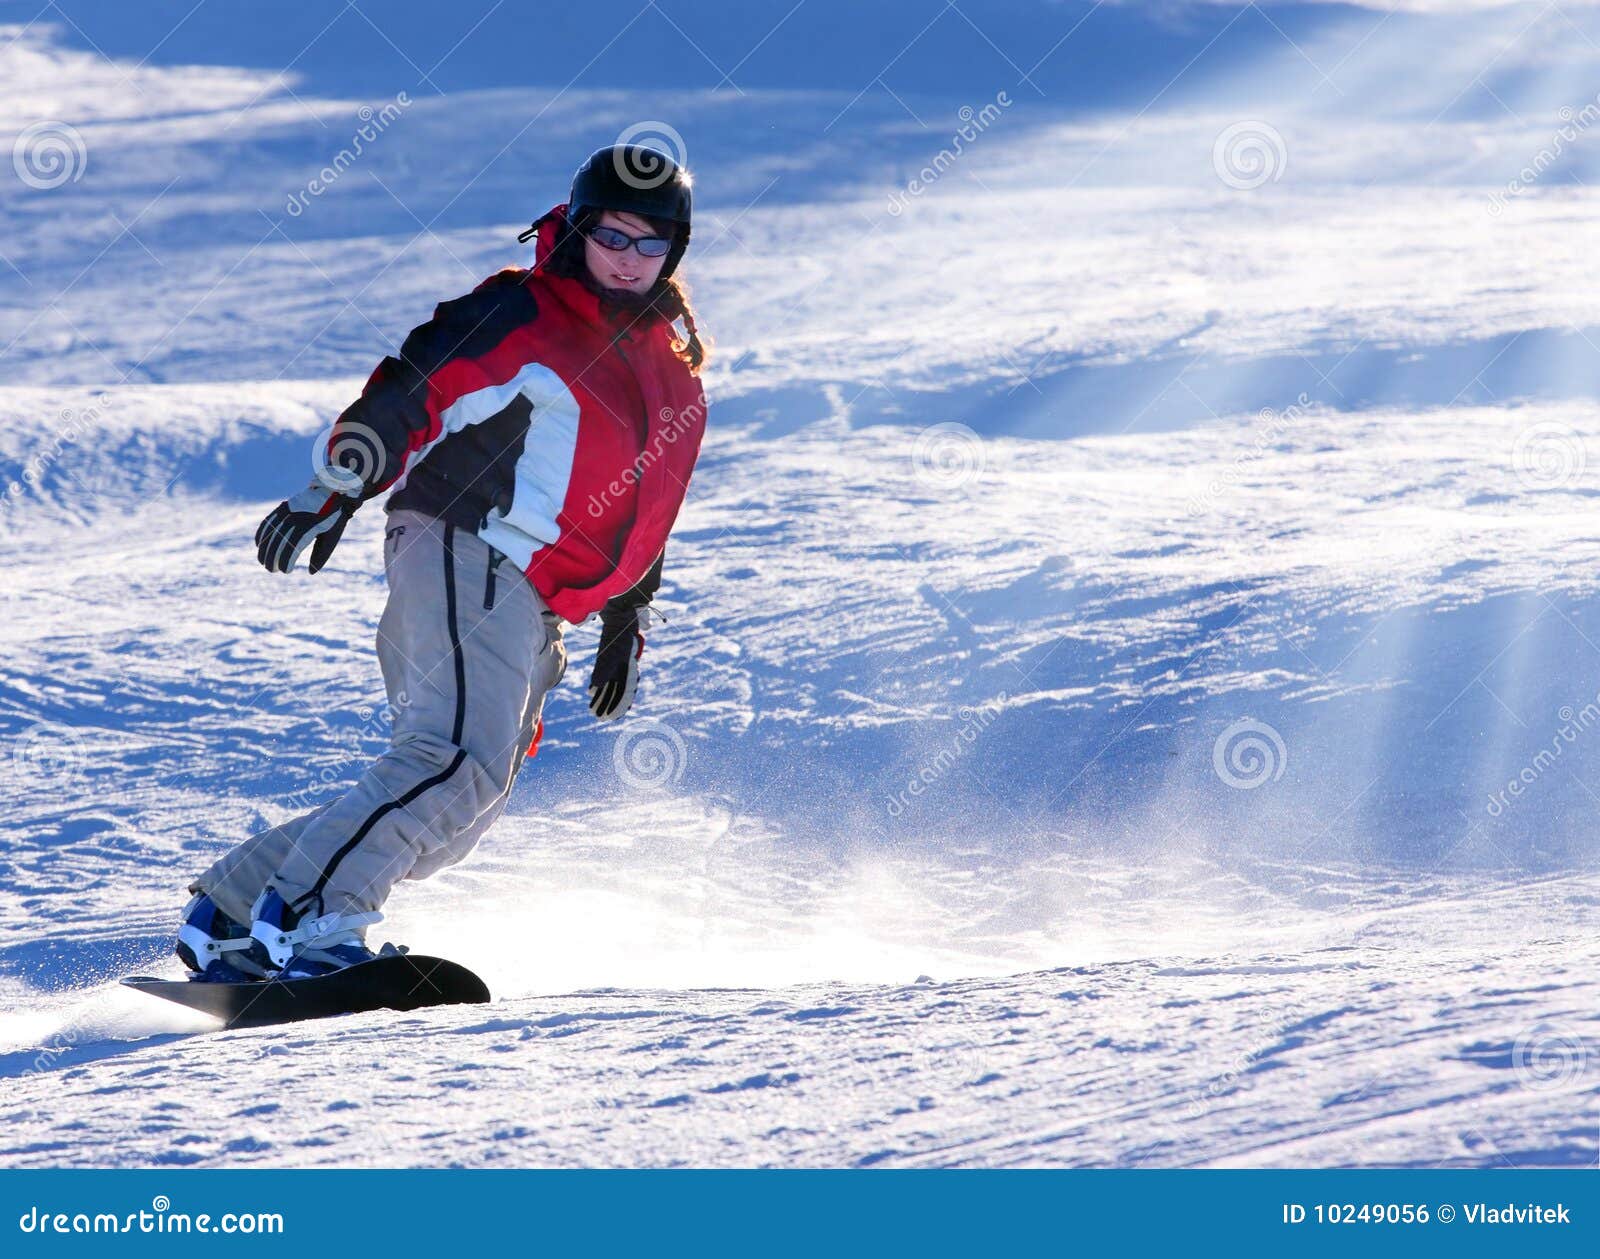 Snowboarder woman stock photo. Image of snowboard, people - 10249056